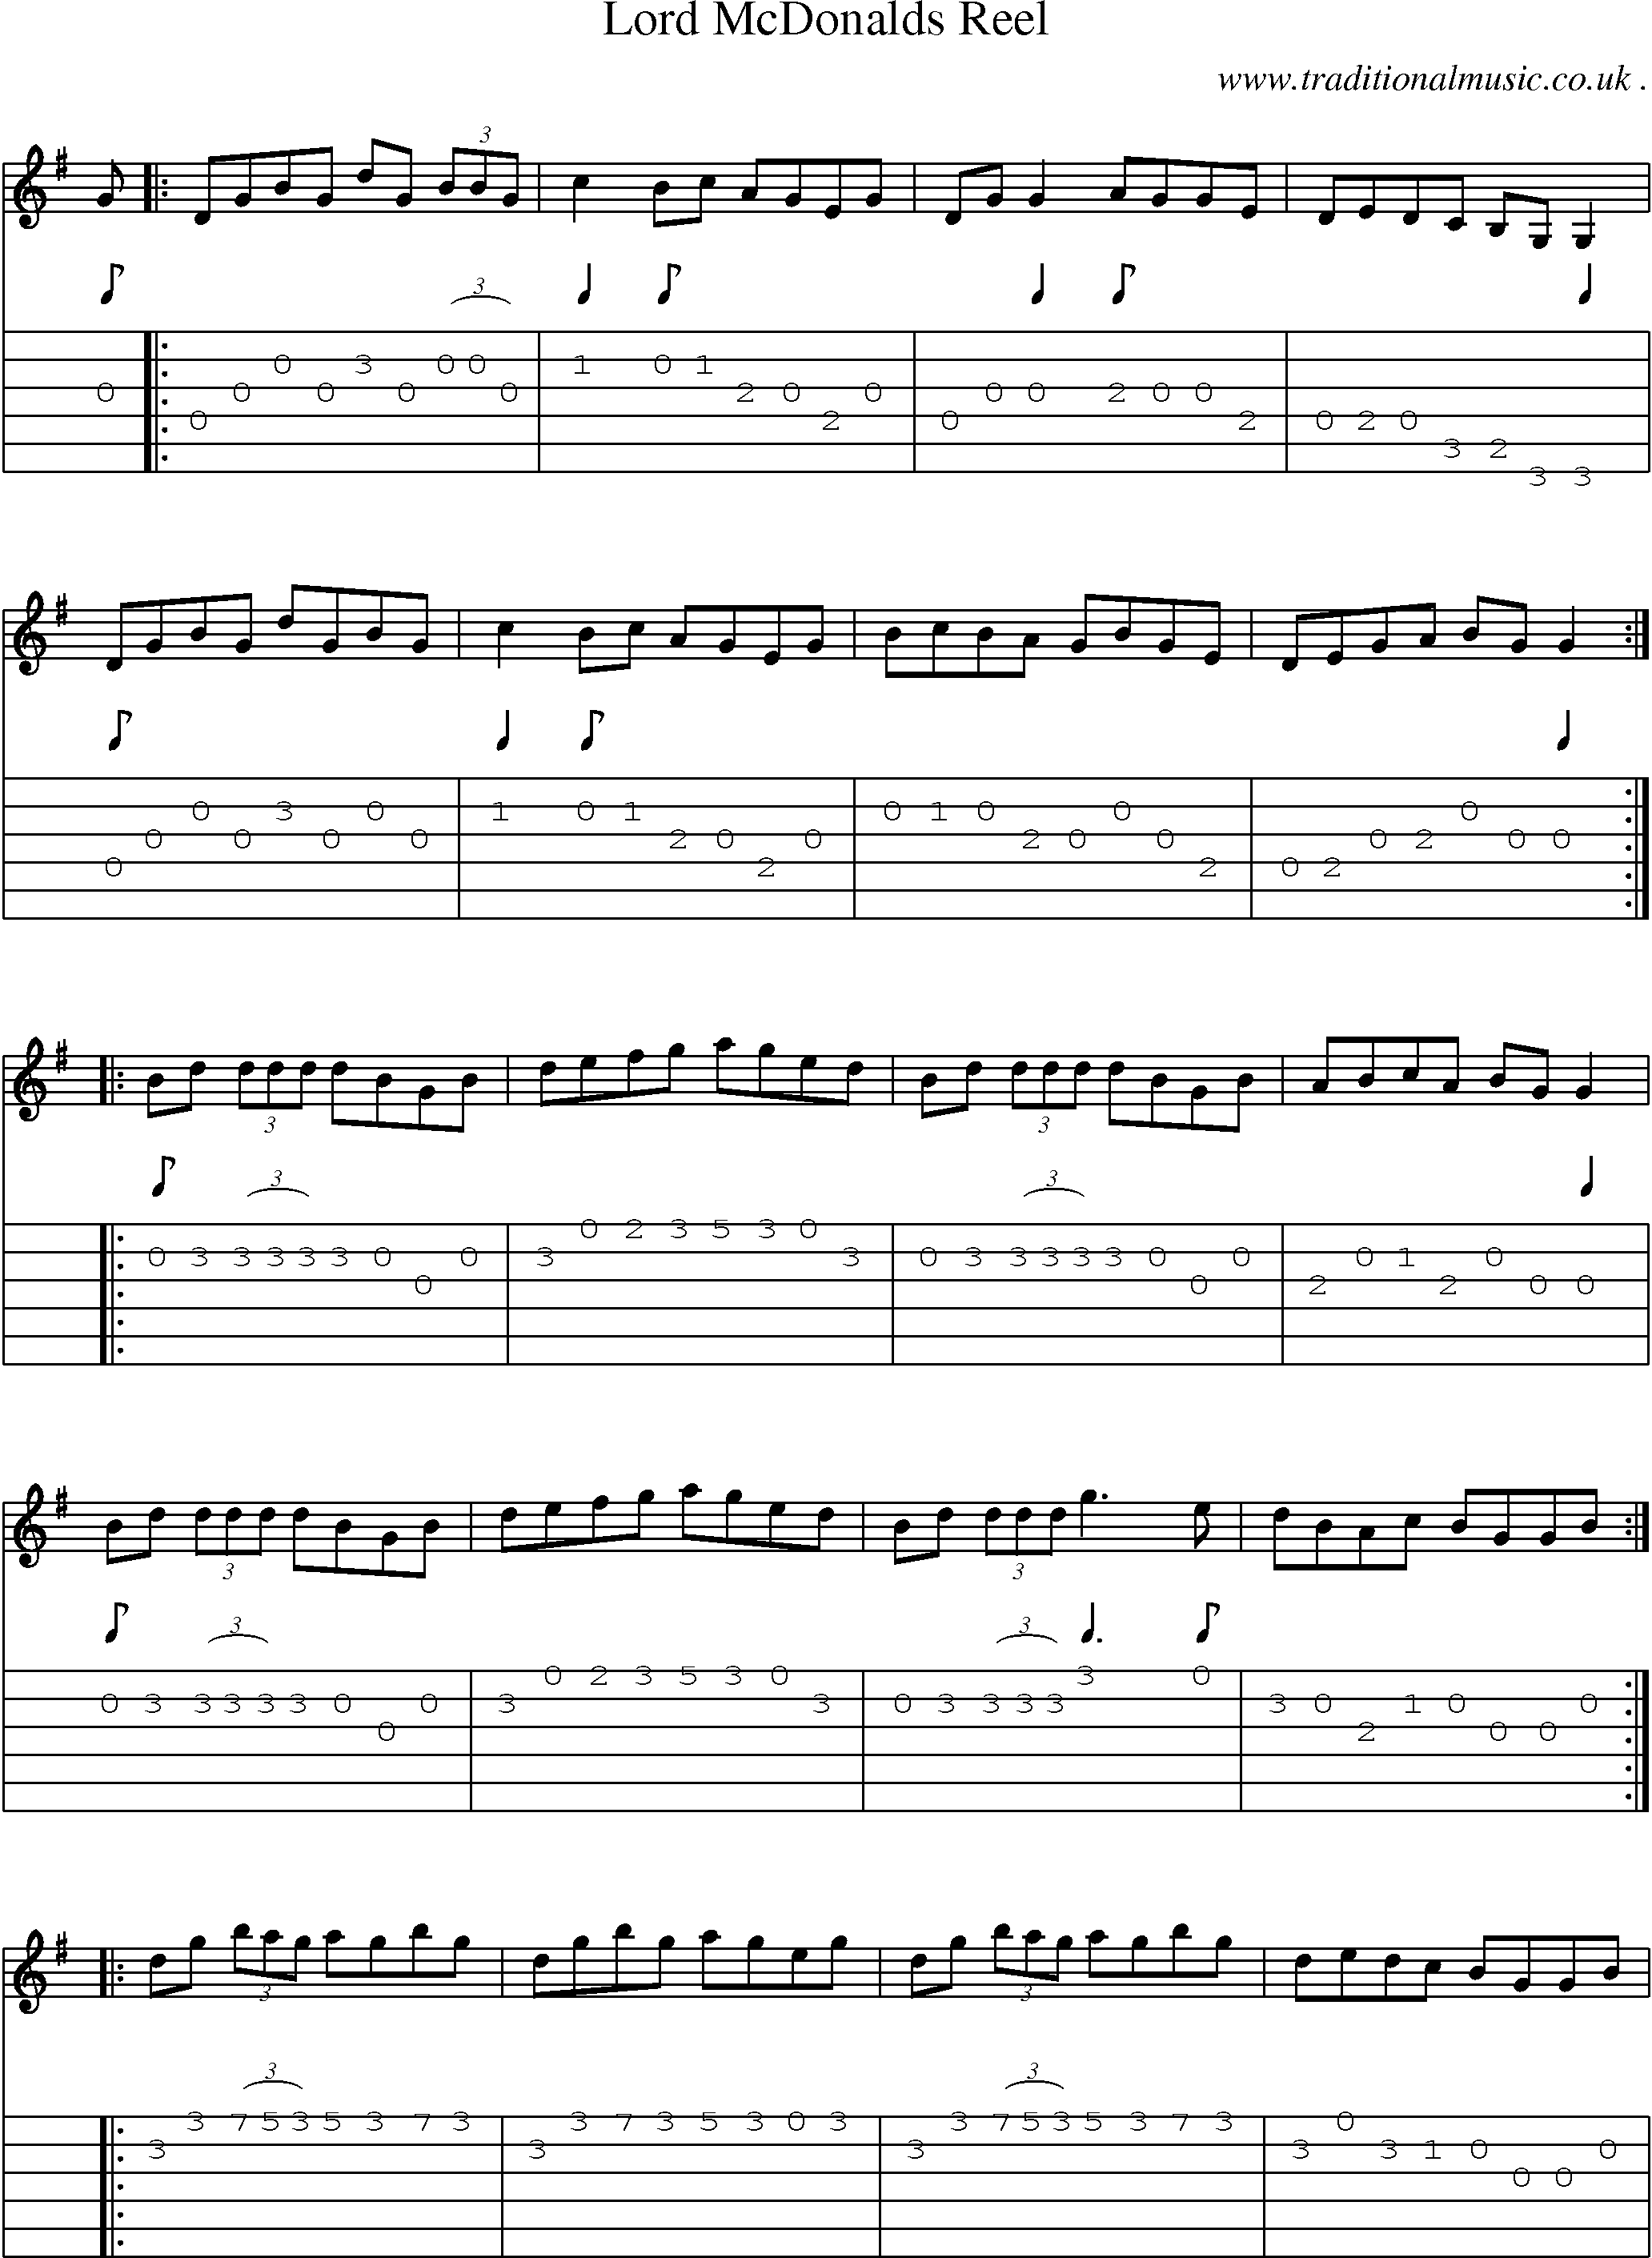 Sheet-Music and Guitar Tabs for Lord Mcdonalds Reel